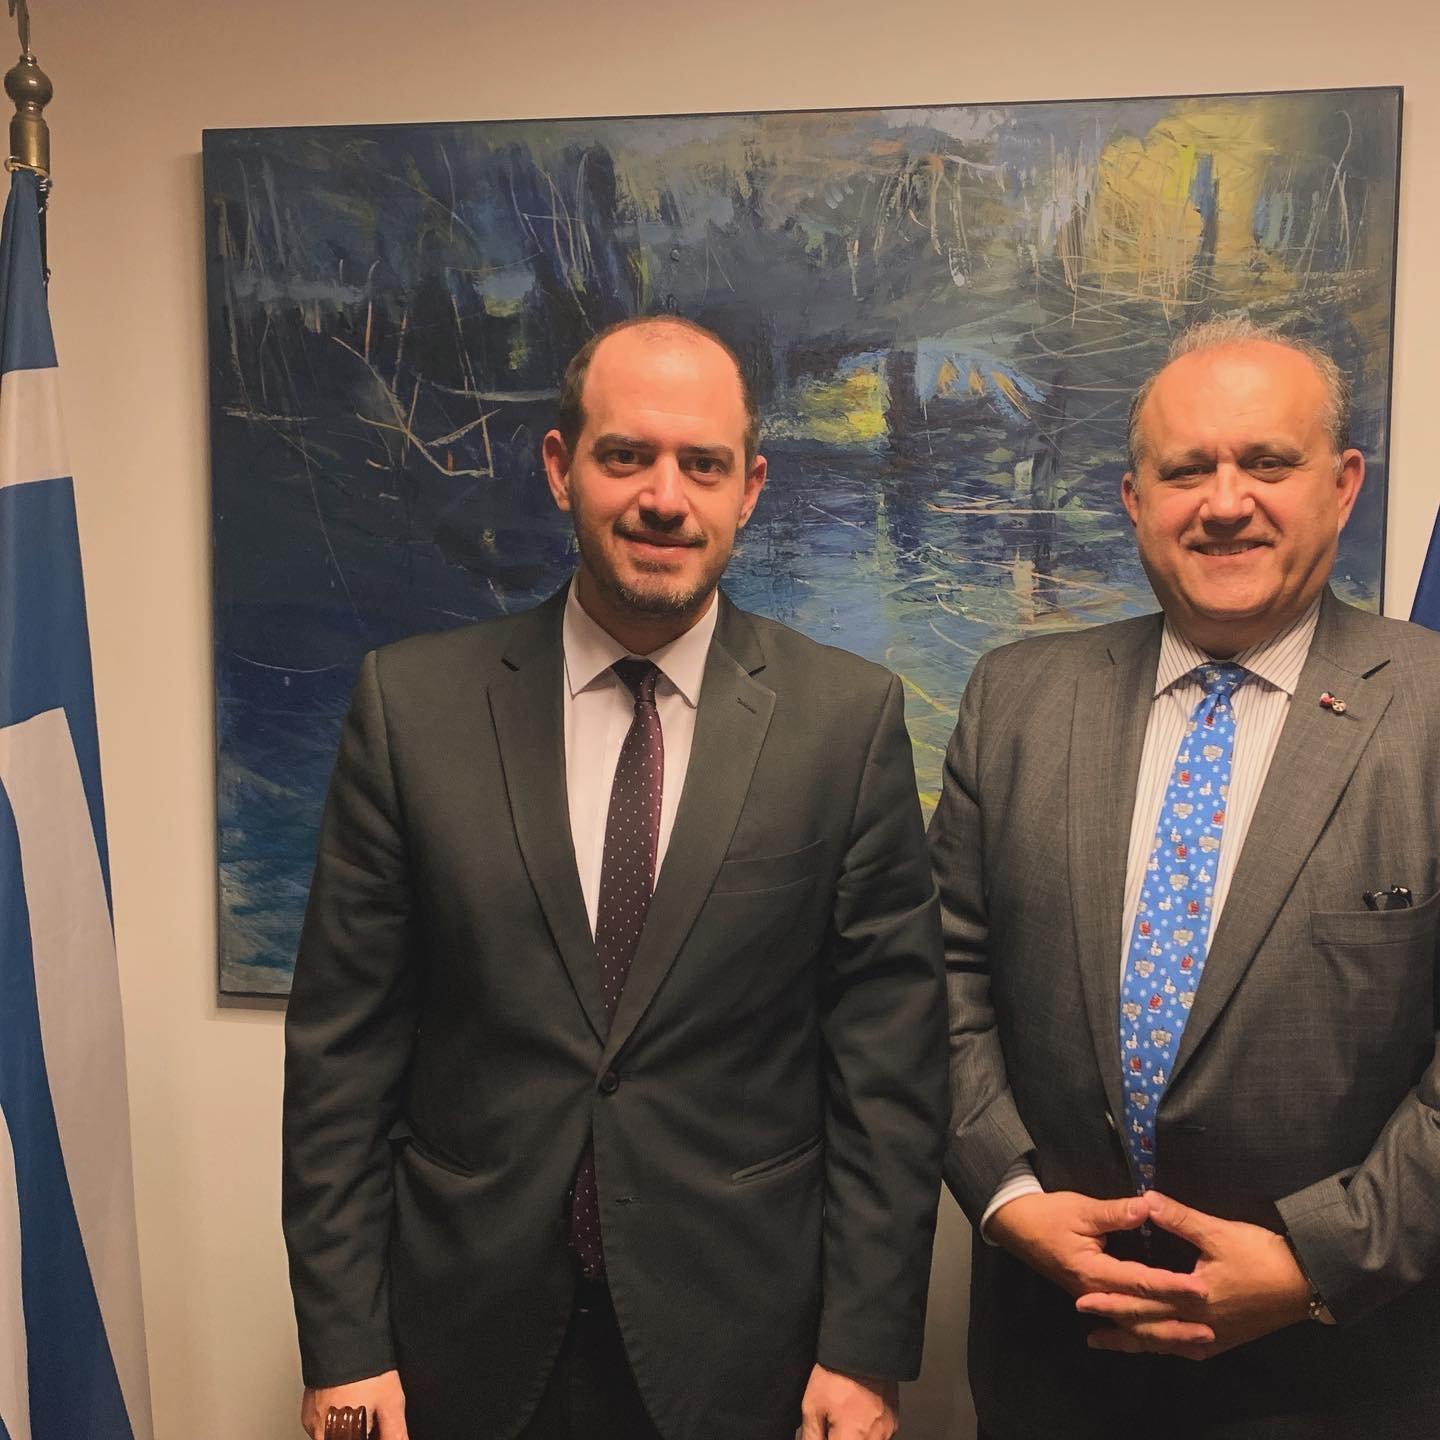  President Larigakis meeting with Deputy Foreign Minister, George Kotsiras, to discuss U.S.-Greece relations and the role of the Greek-American community.  